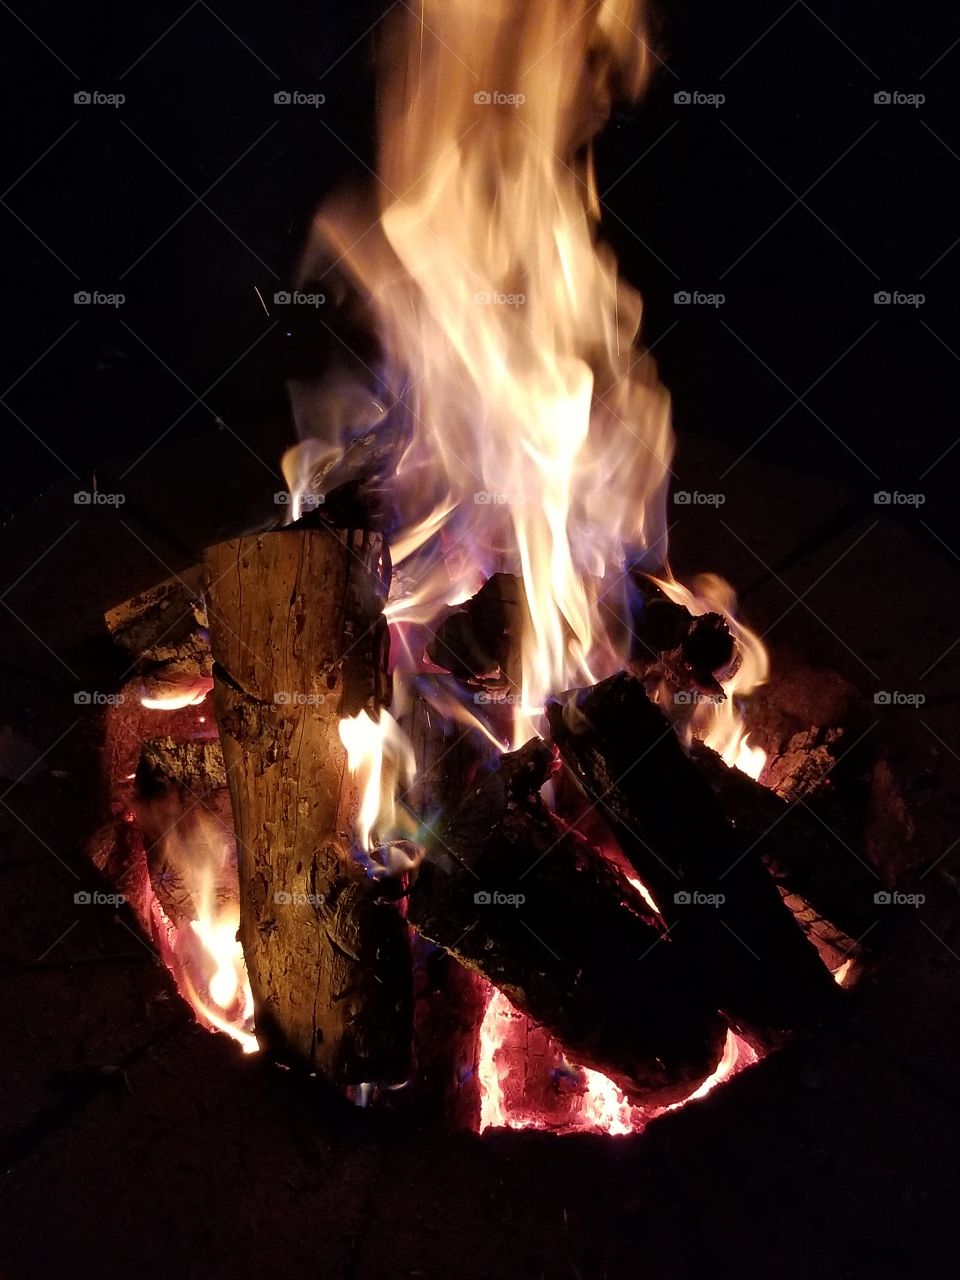 Firepit for a cold night